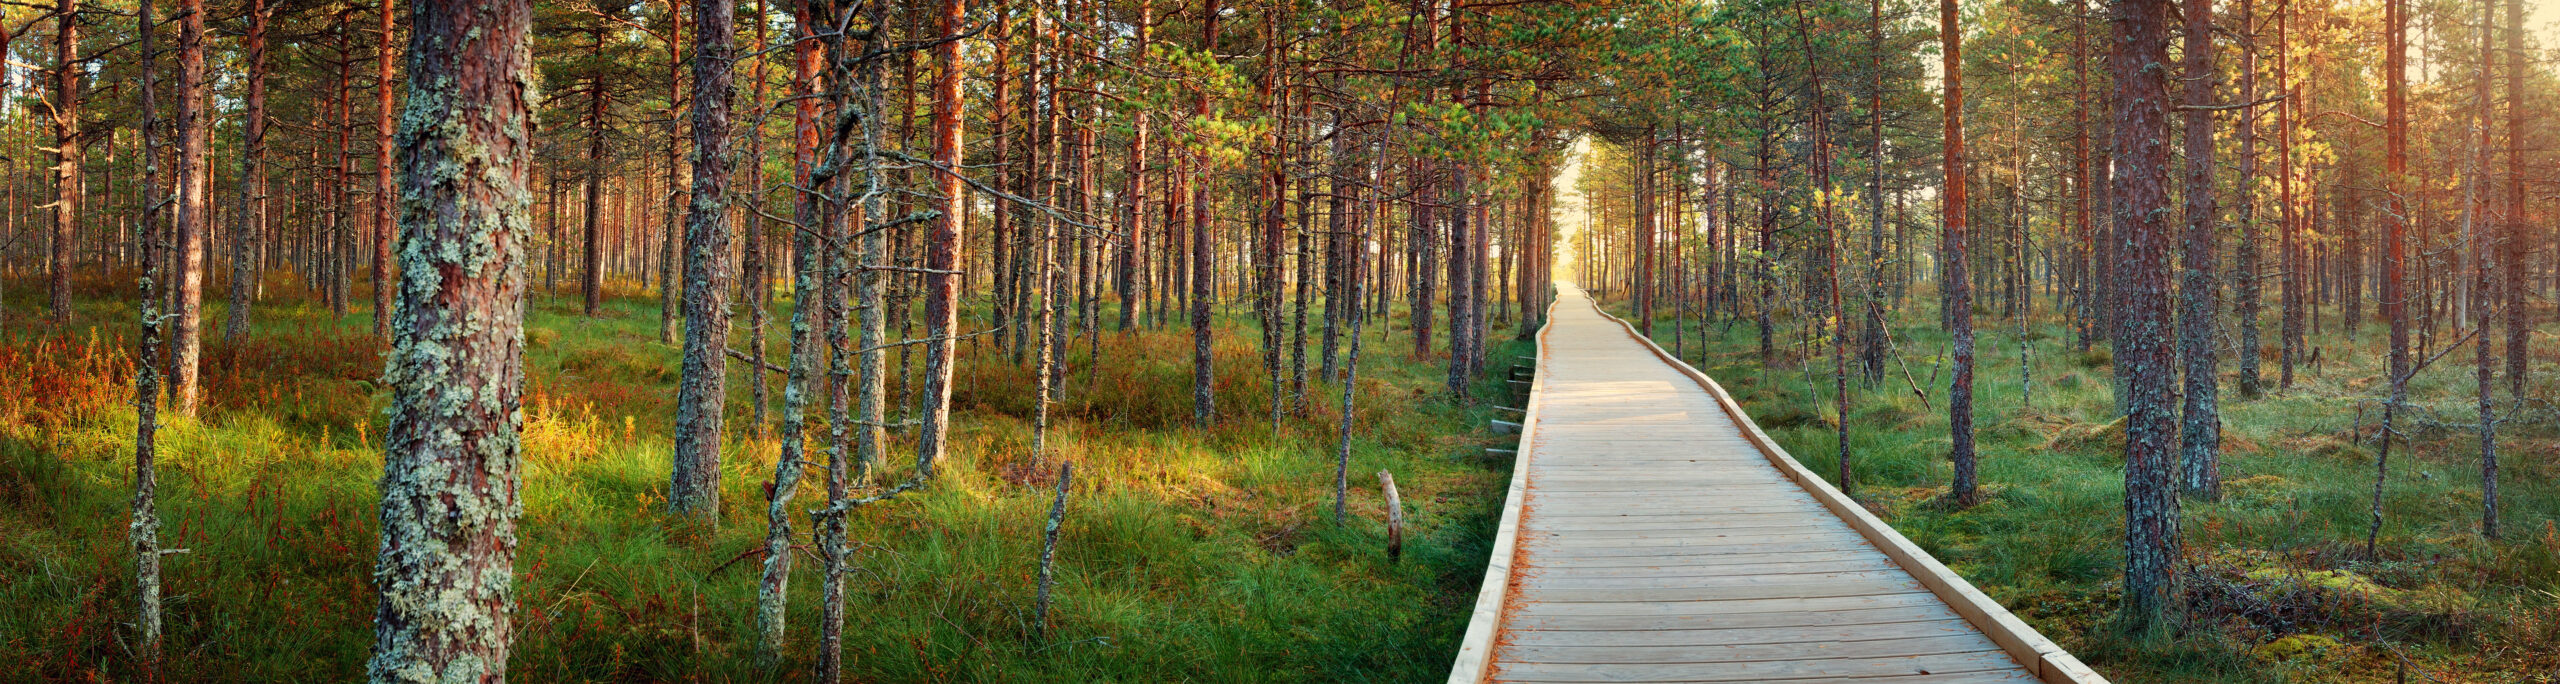 The bogs at national park in autumn. Wooden path in Estonia.